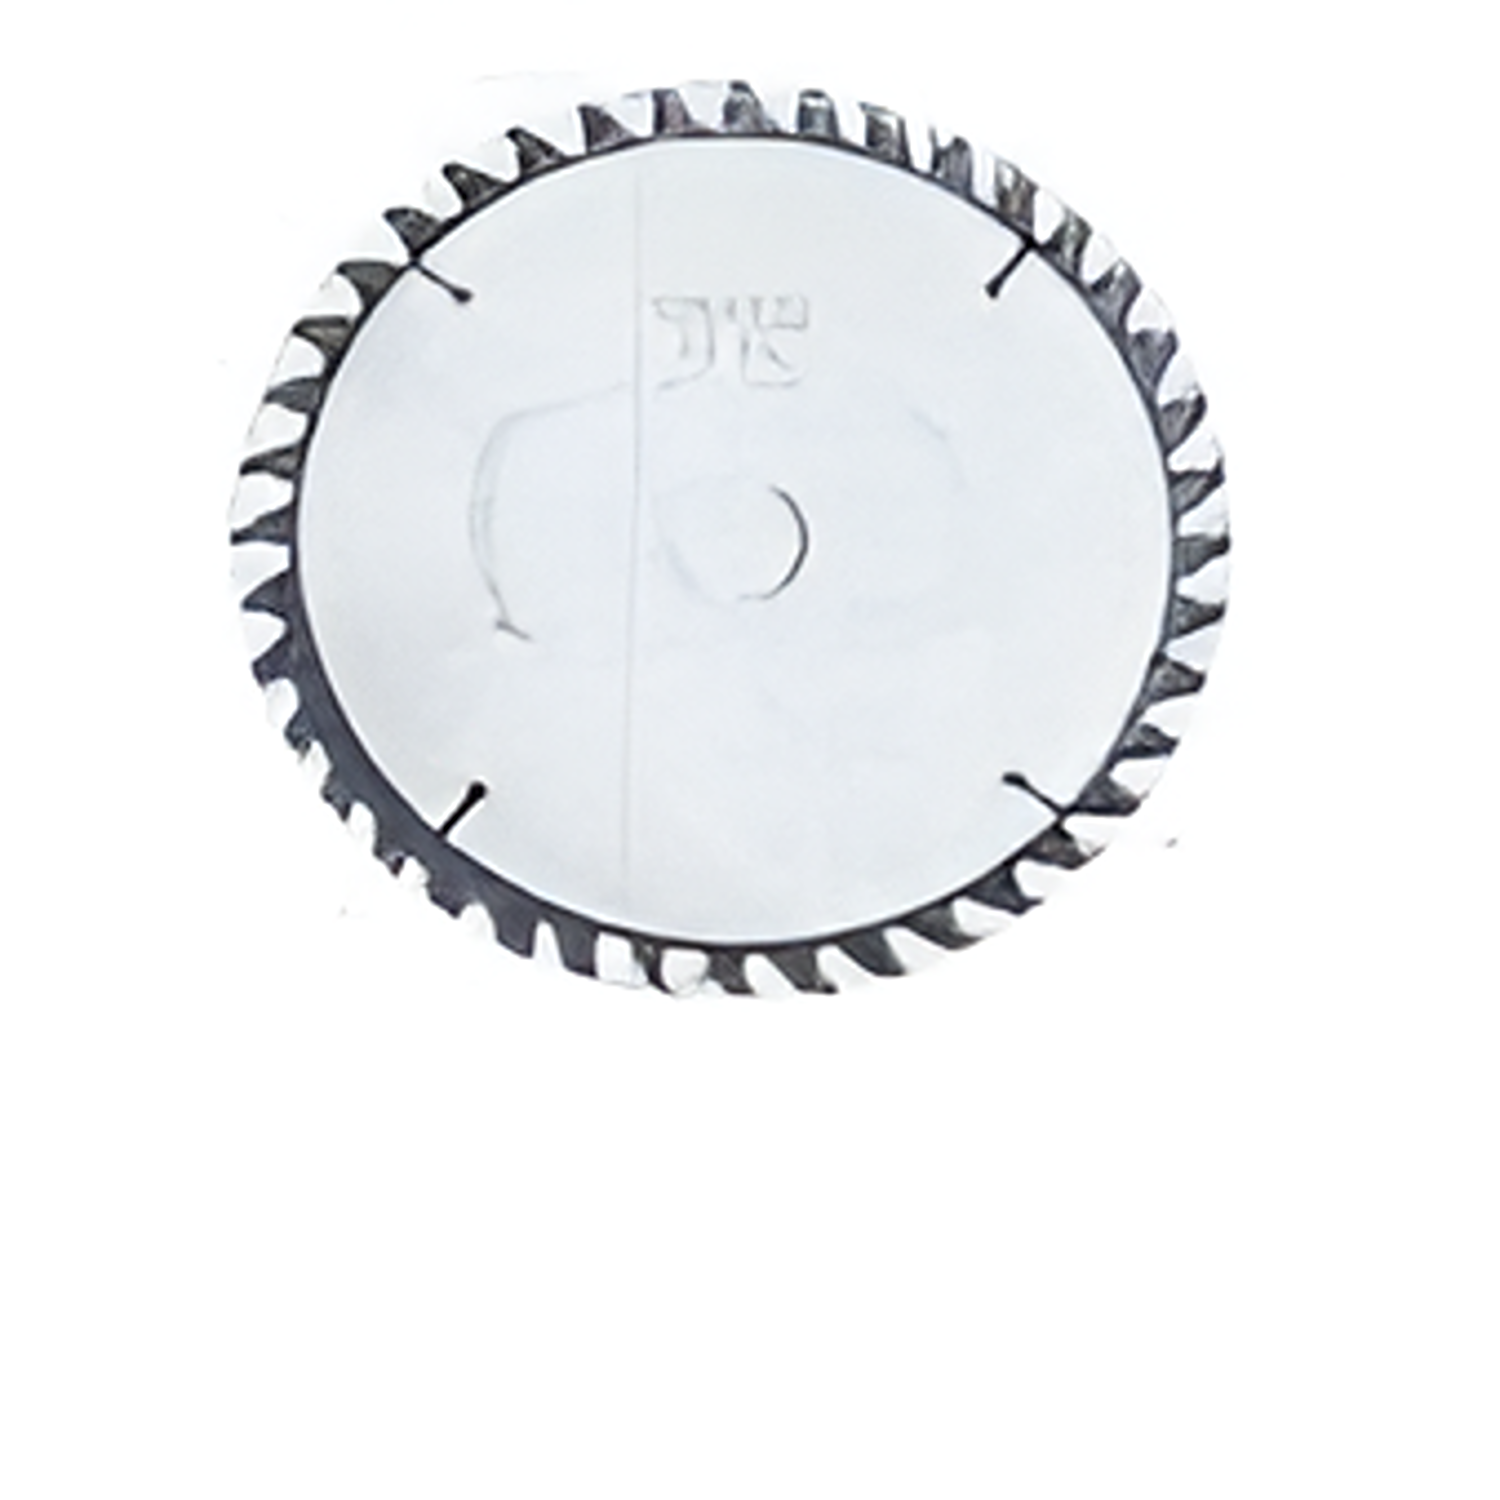 YEW AIK AE00623 Tipped Circular Saw Blade for Wood - Premium Tipped Circular Saw Blade from YEW AIK - Shop now at Yew Aik.